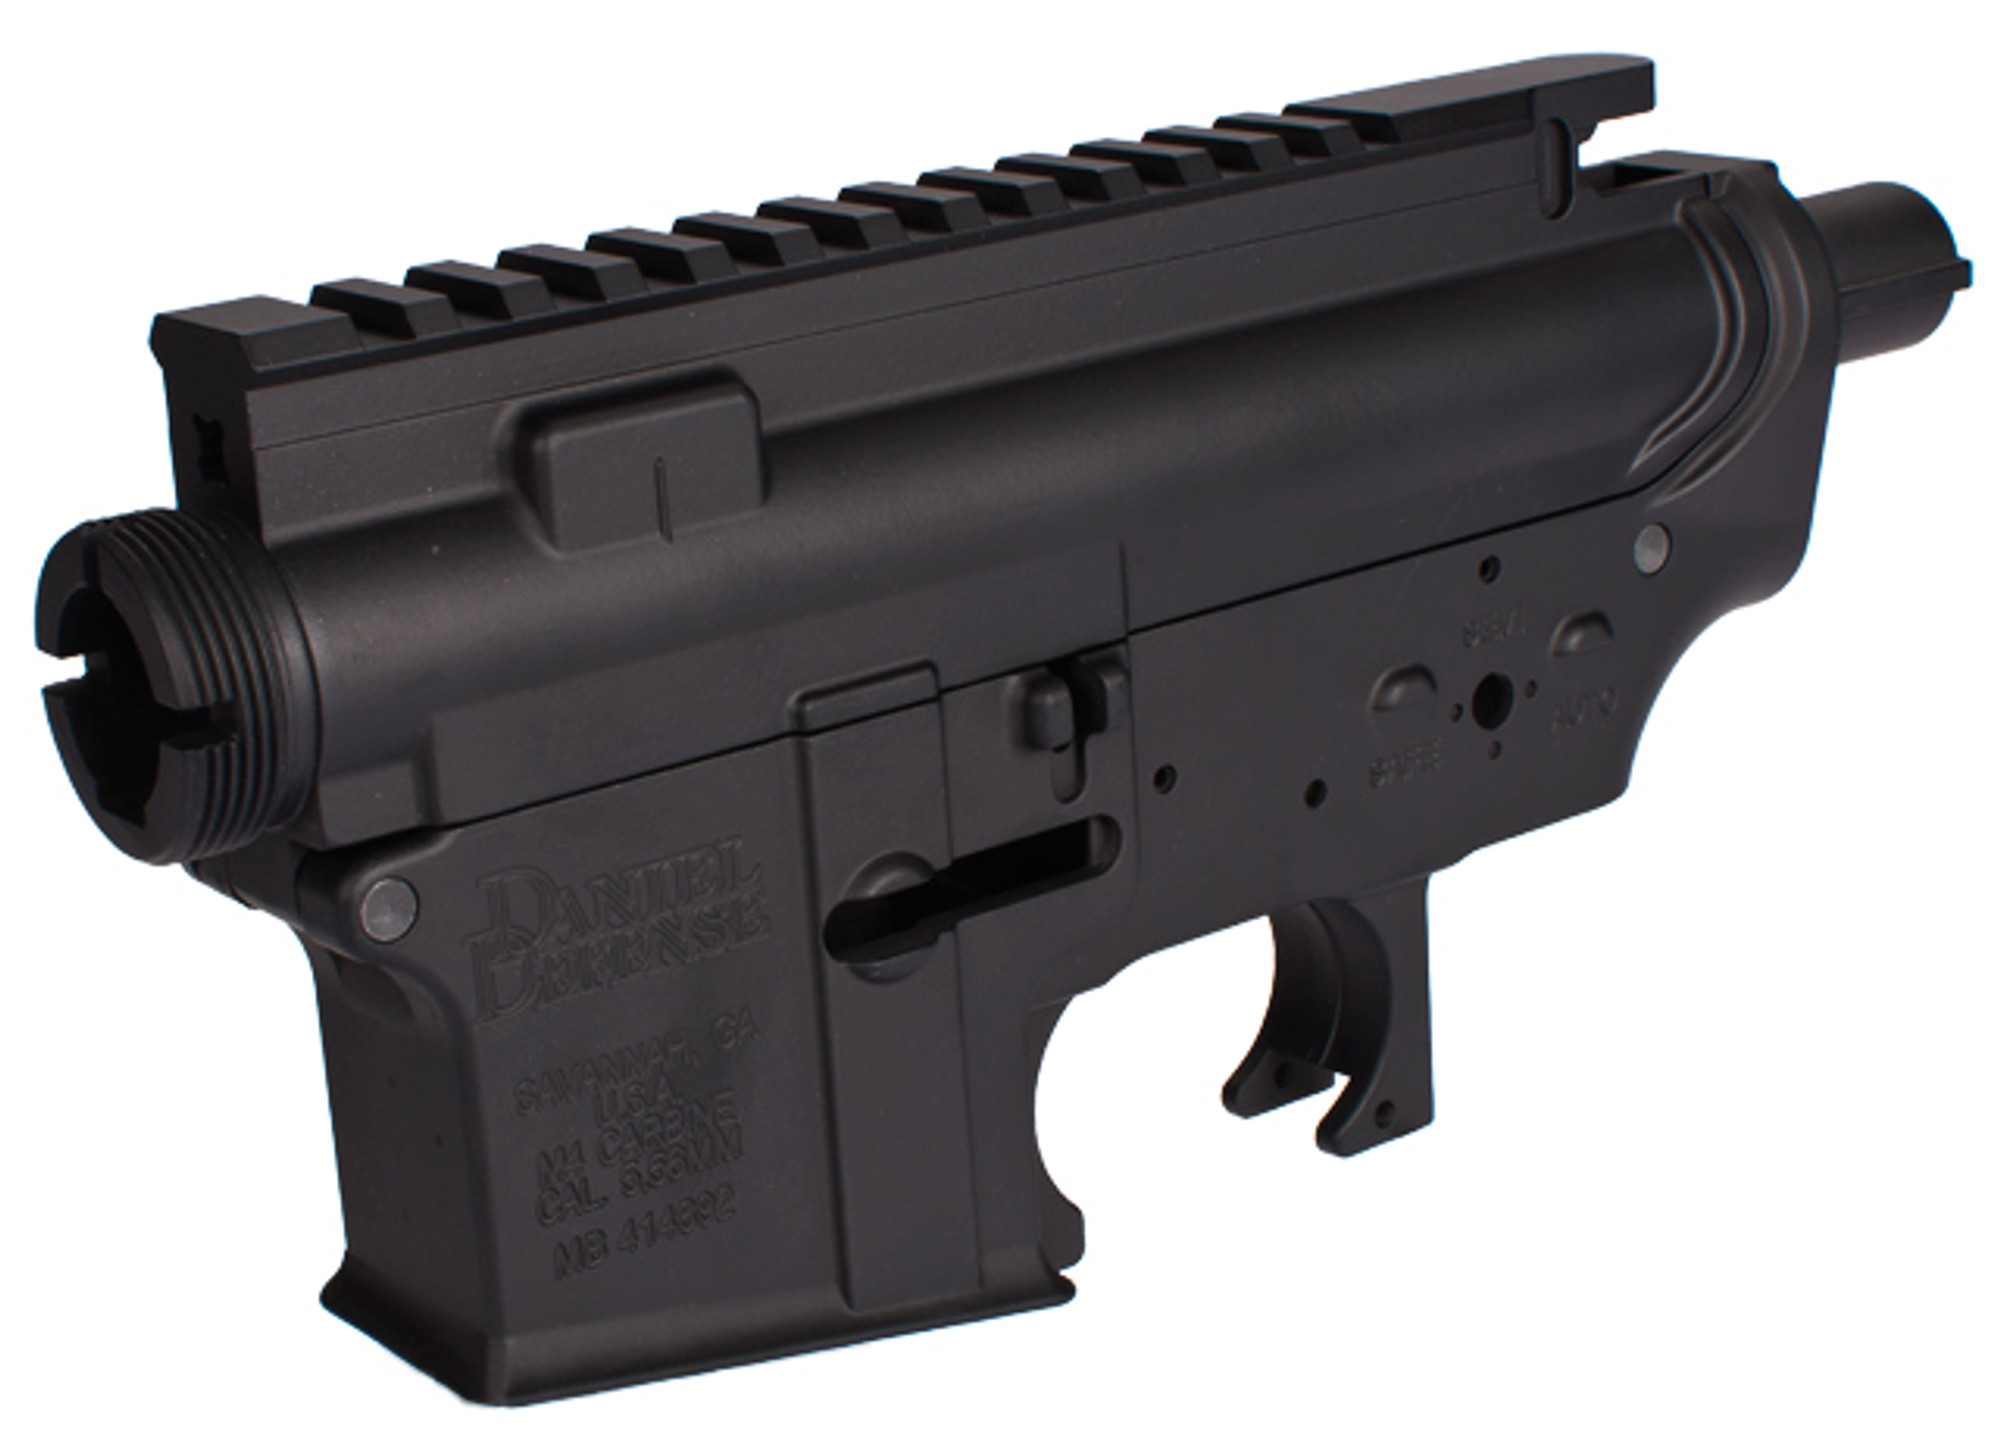 Madbull Metal Receiver for M4  M16 Series Airsoft AEG Rifles - Vickers Tactical